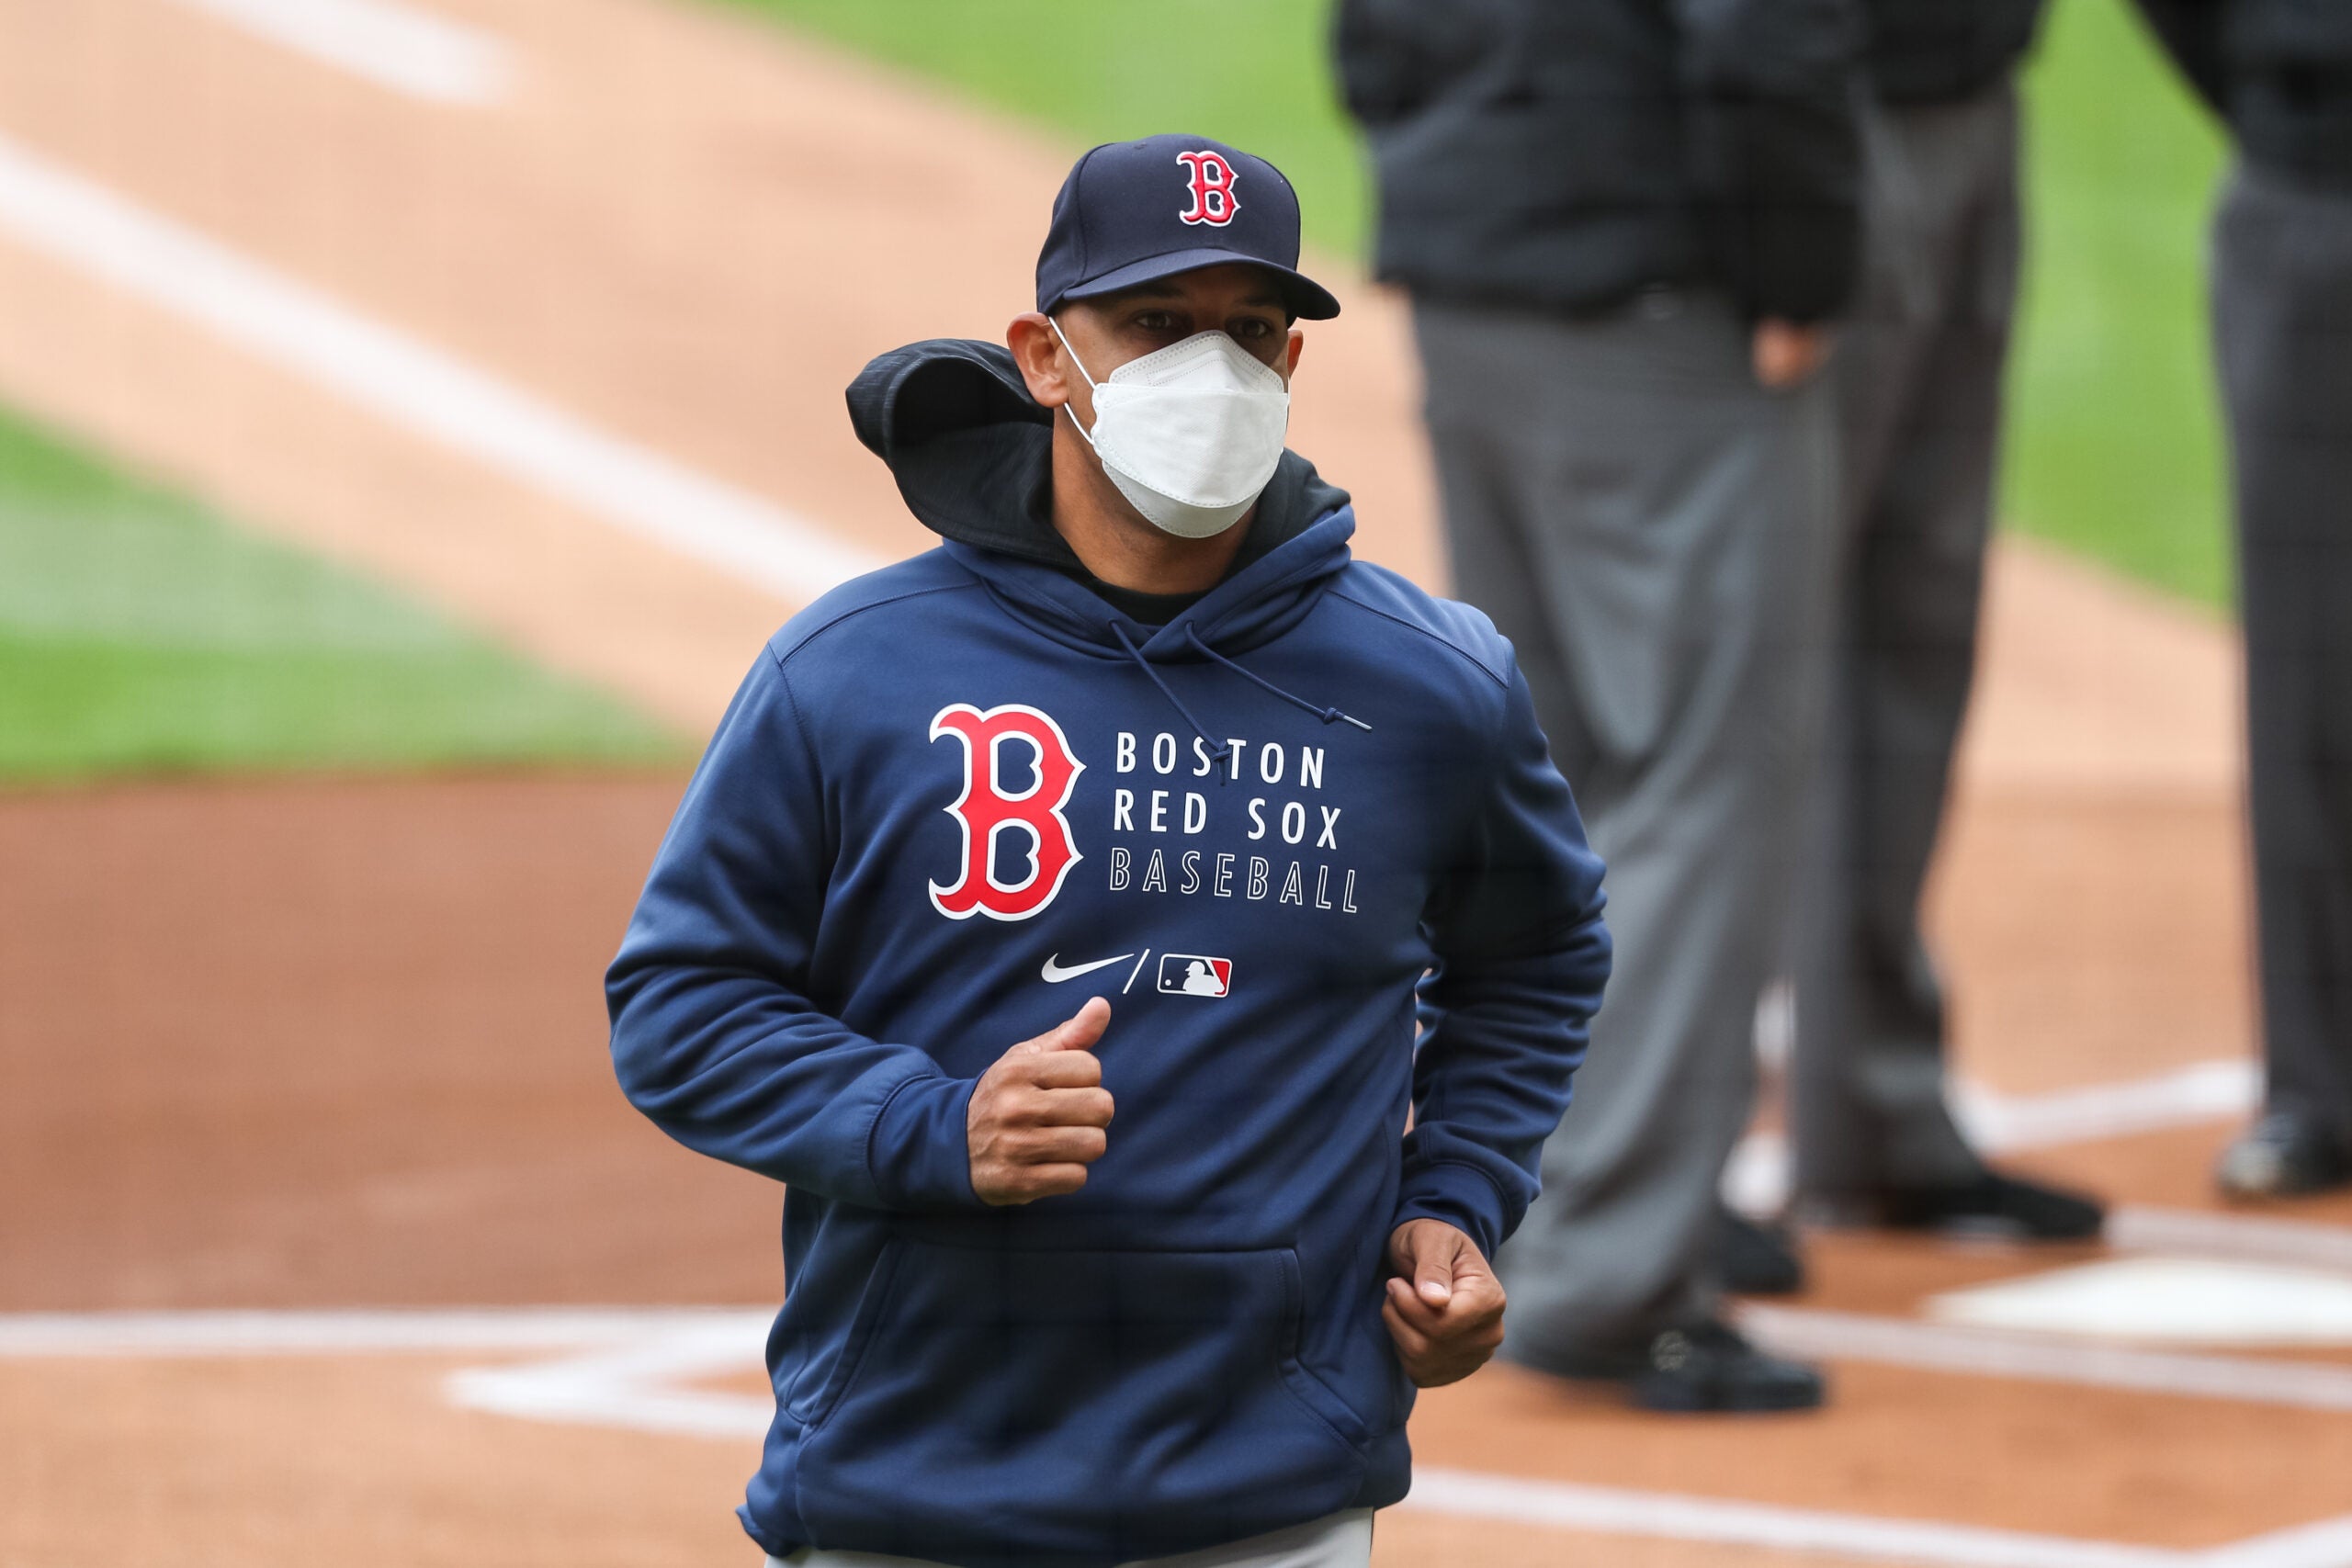 That's two!': Alex Cora ejected from Red Sox loss for arguing foul ball